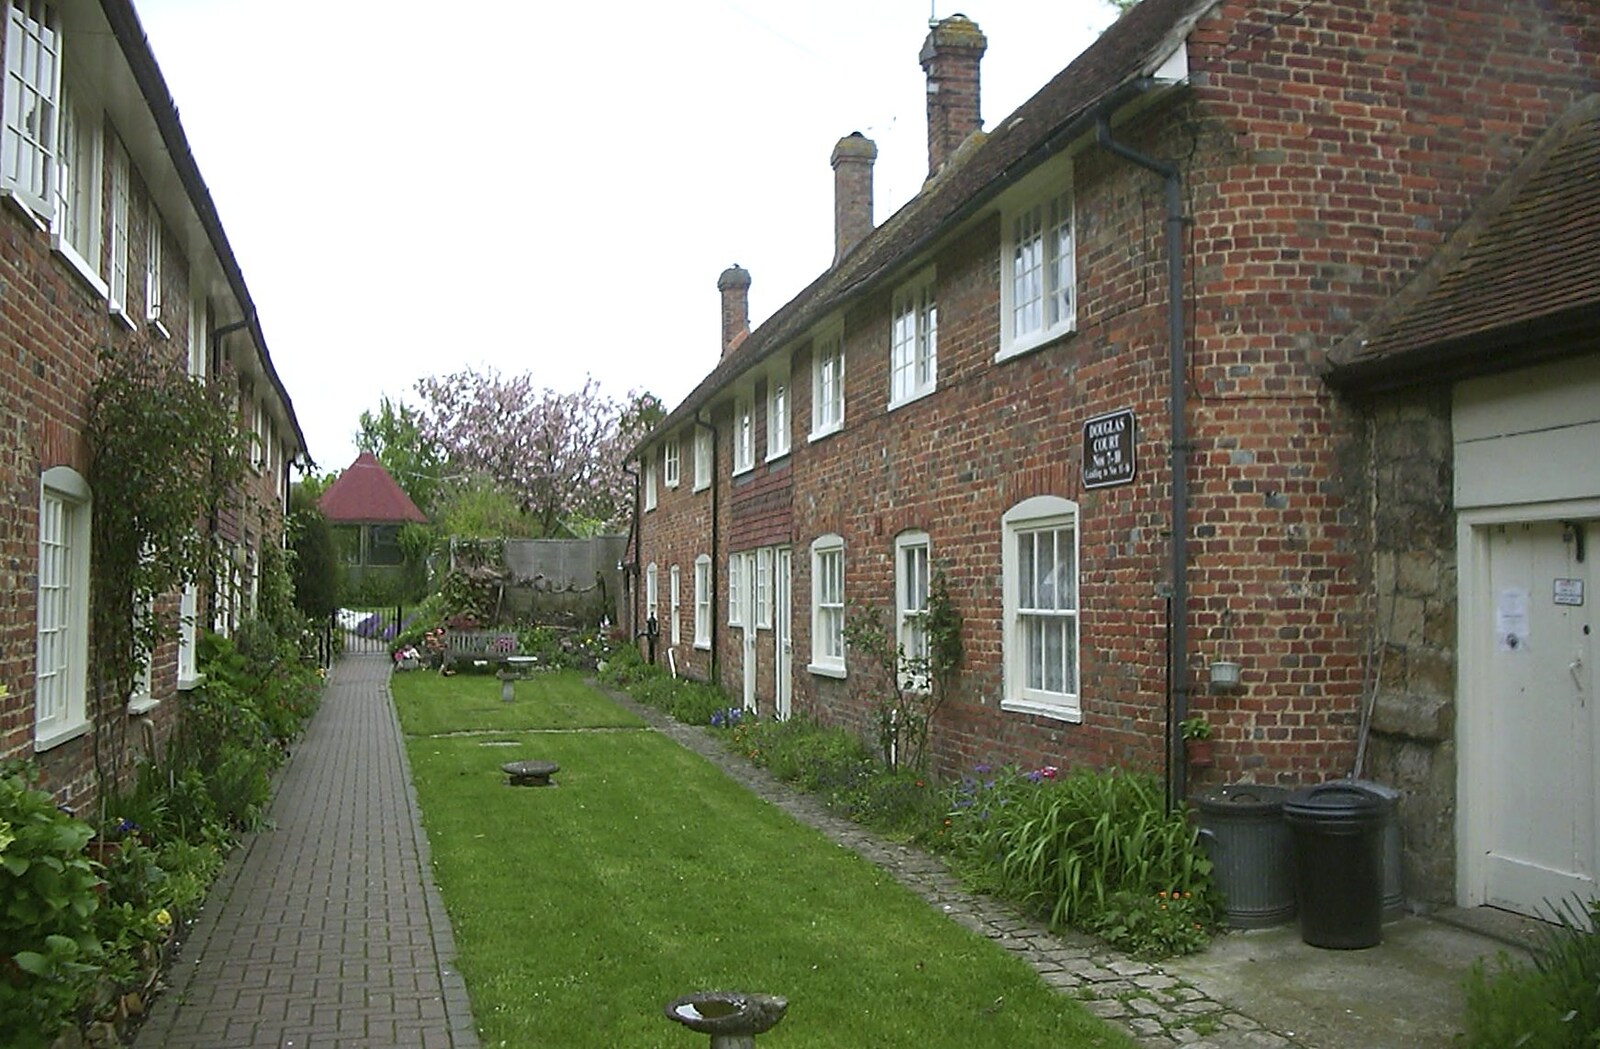 The BSCC Annual Bike Ride, Lenham, Kent - 8th May 2004: A nice little row of cottages